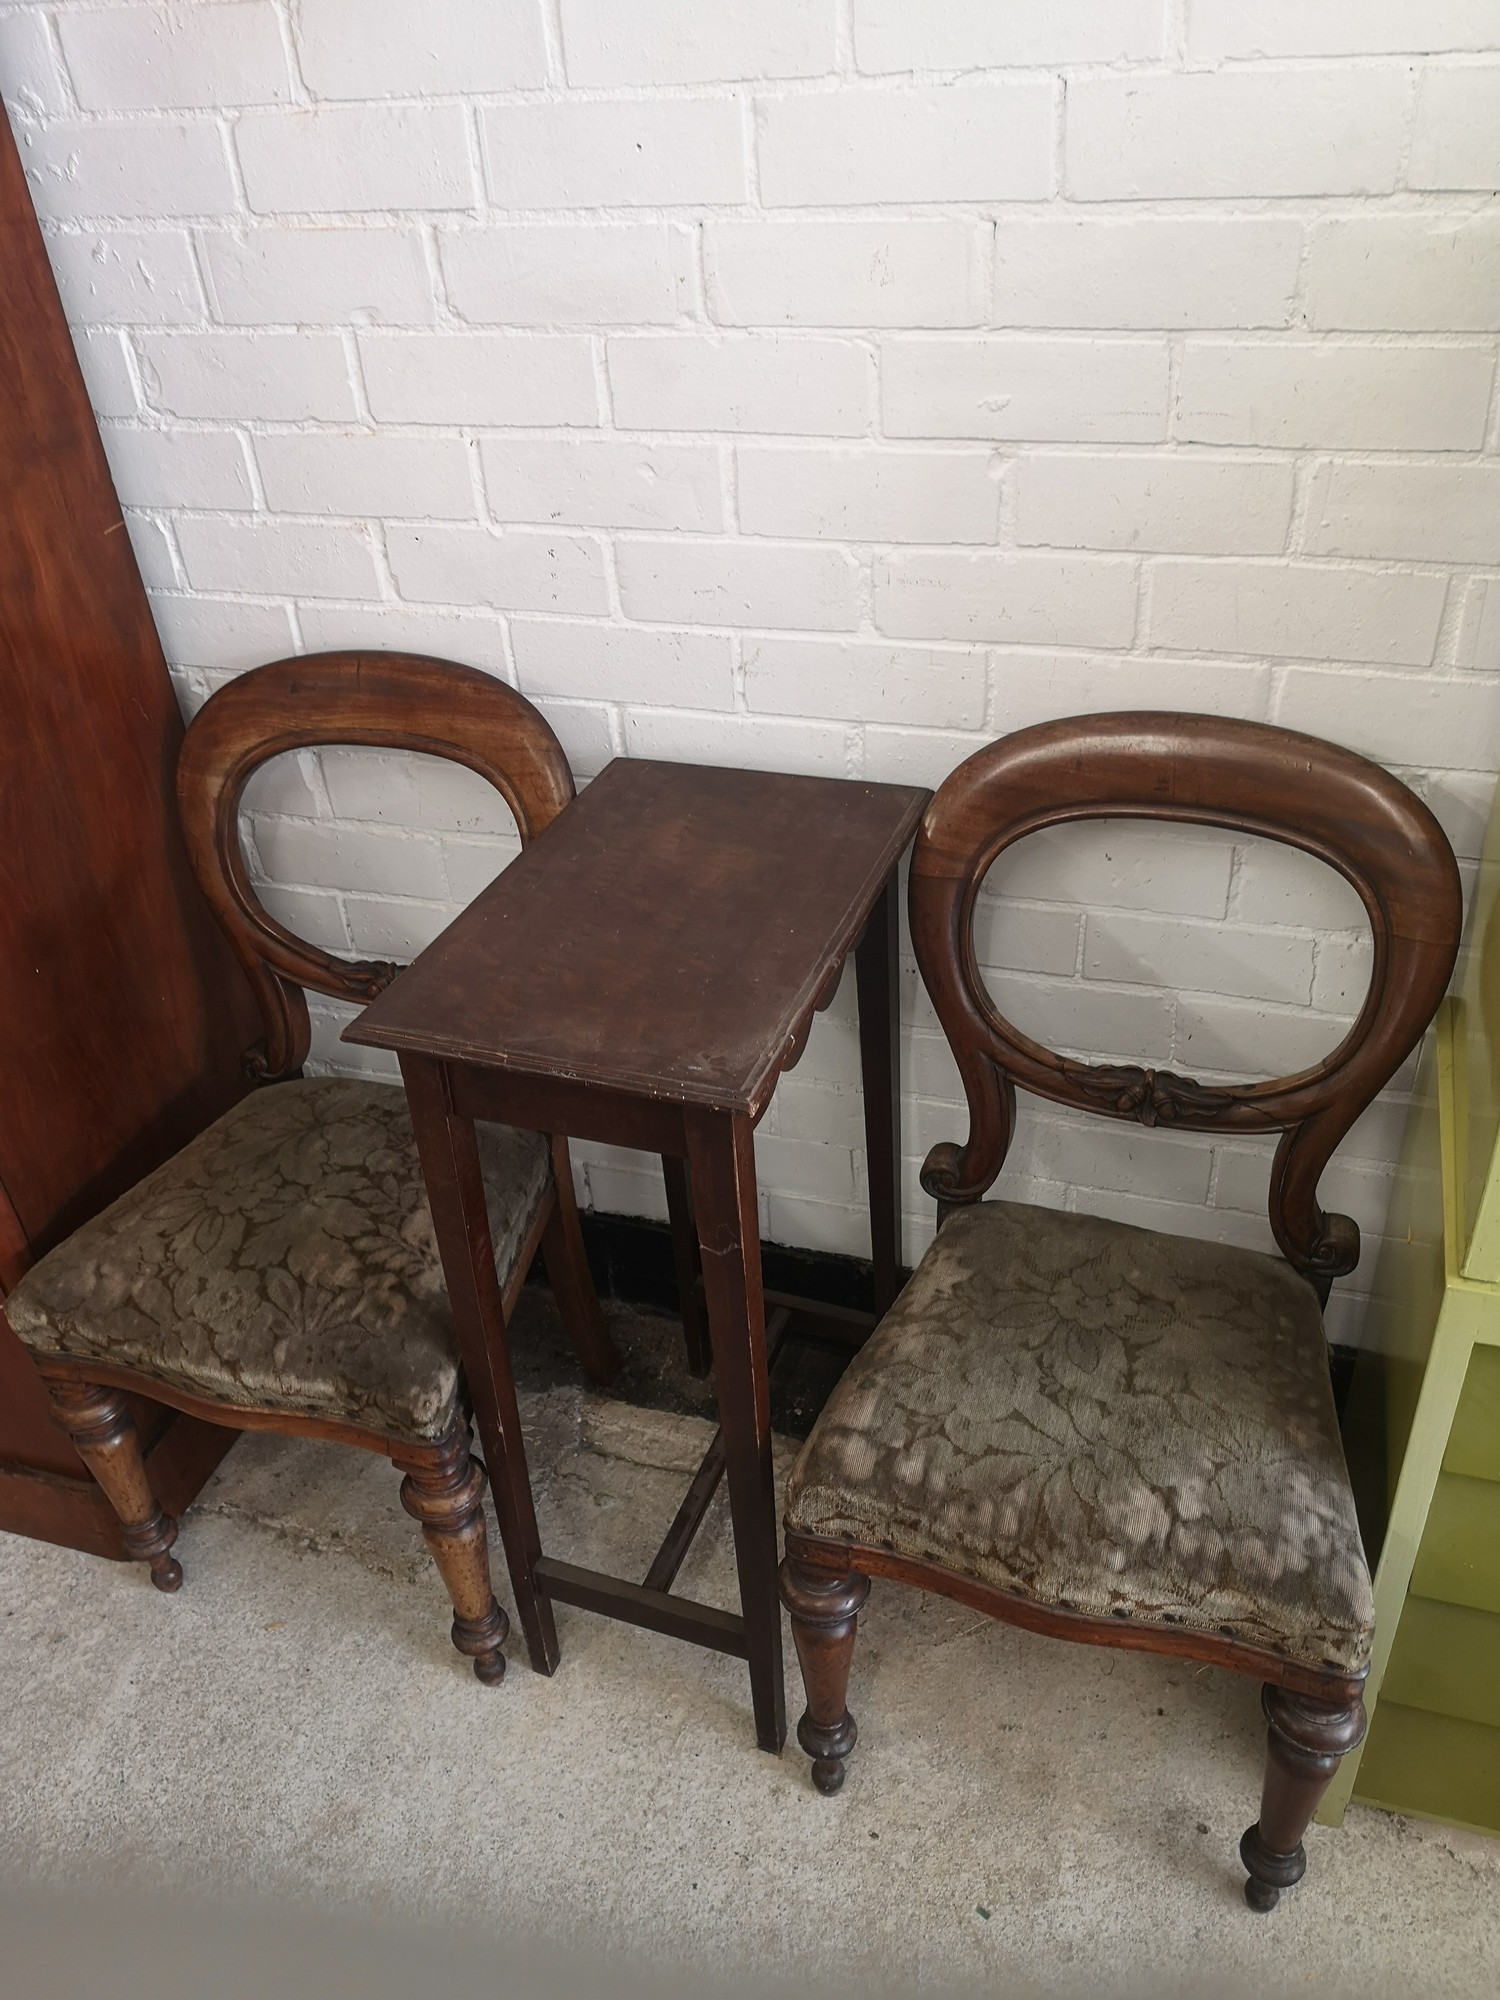 Pair of victorian balloon back chairs with 20th century contemporary table. - Image 2 of 4